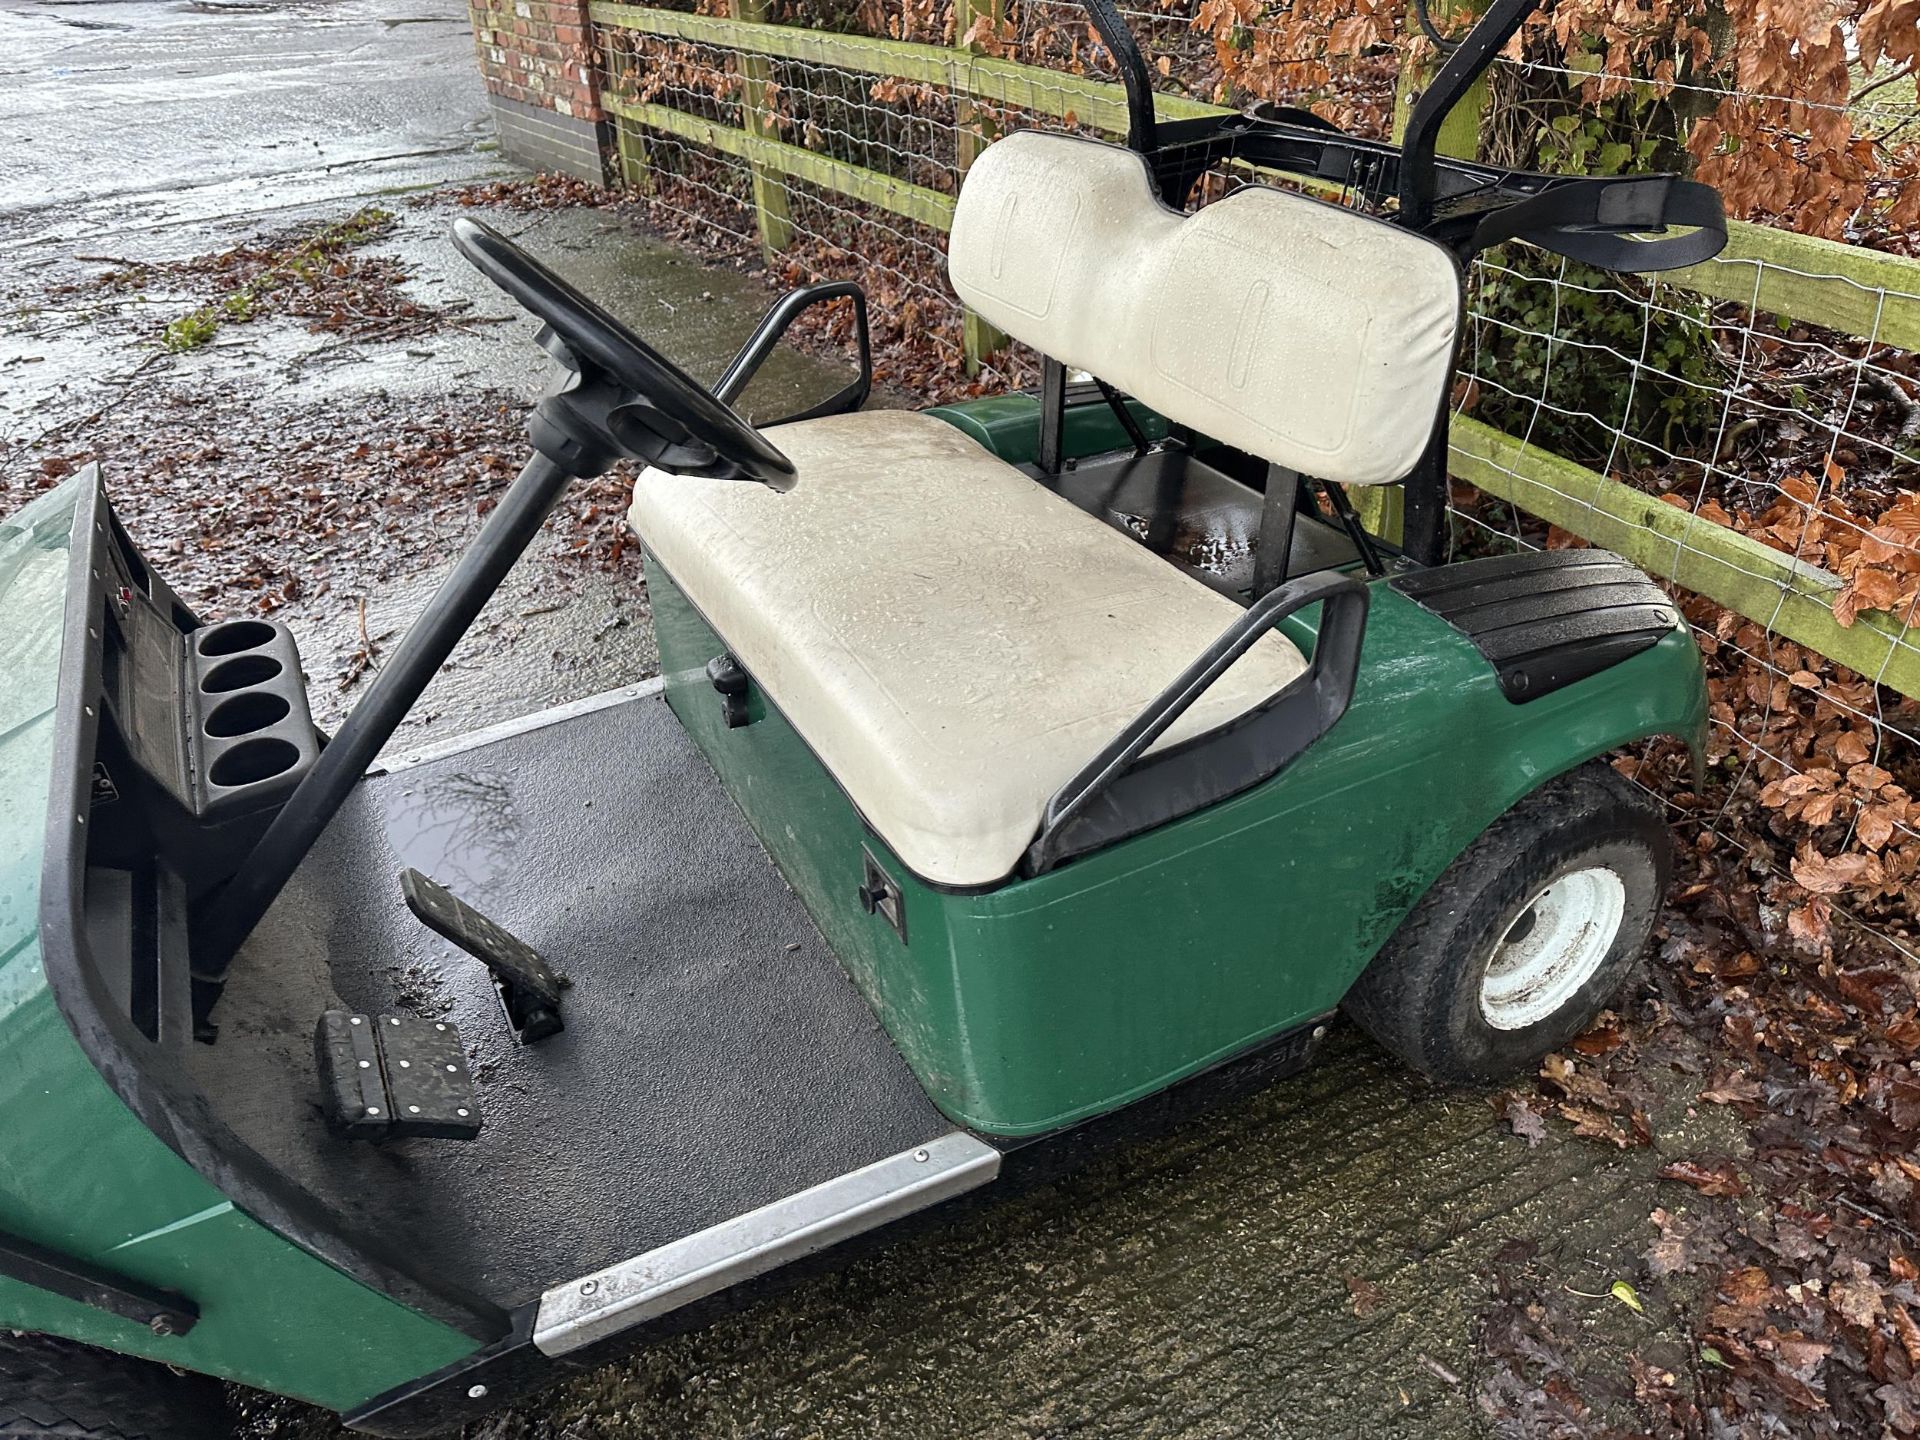 A GREEN EZGO TEXTRON COMPANY ELECTRIC GOLF BUGGY COMPLETE WITH KEY - Image 3 of 8